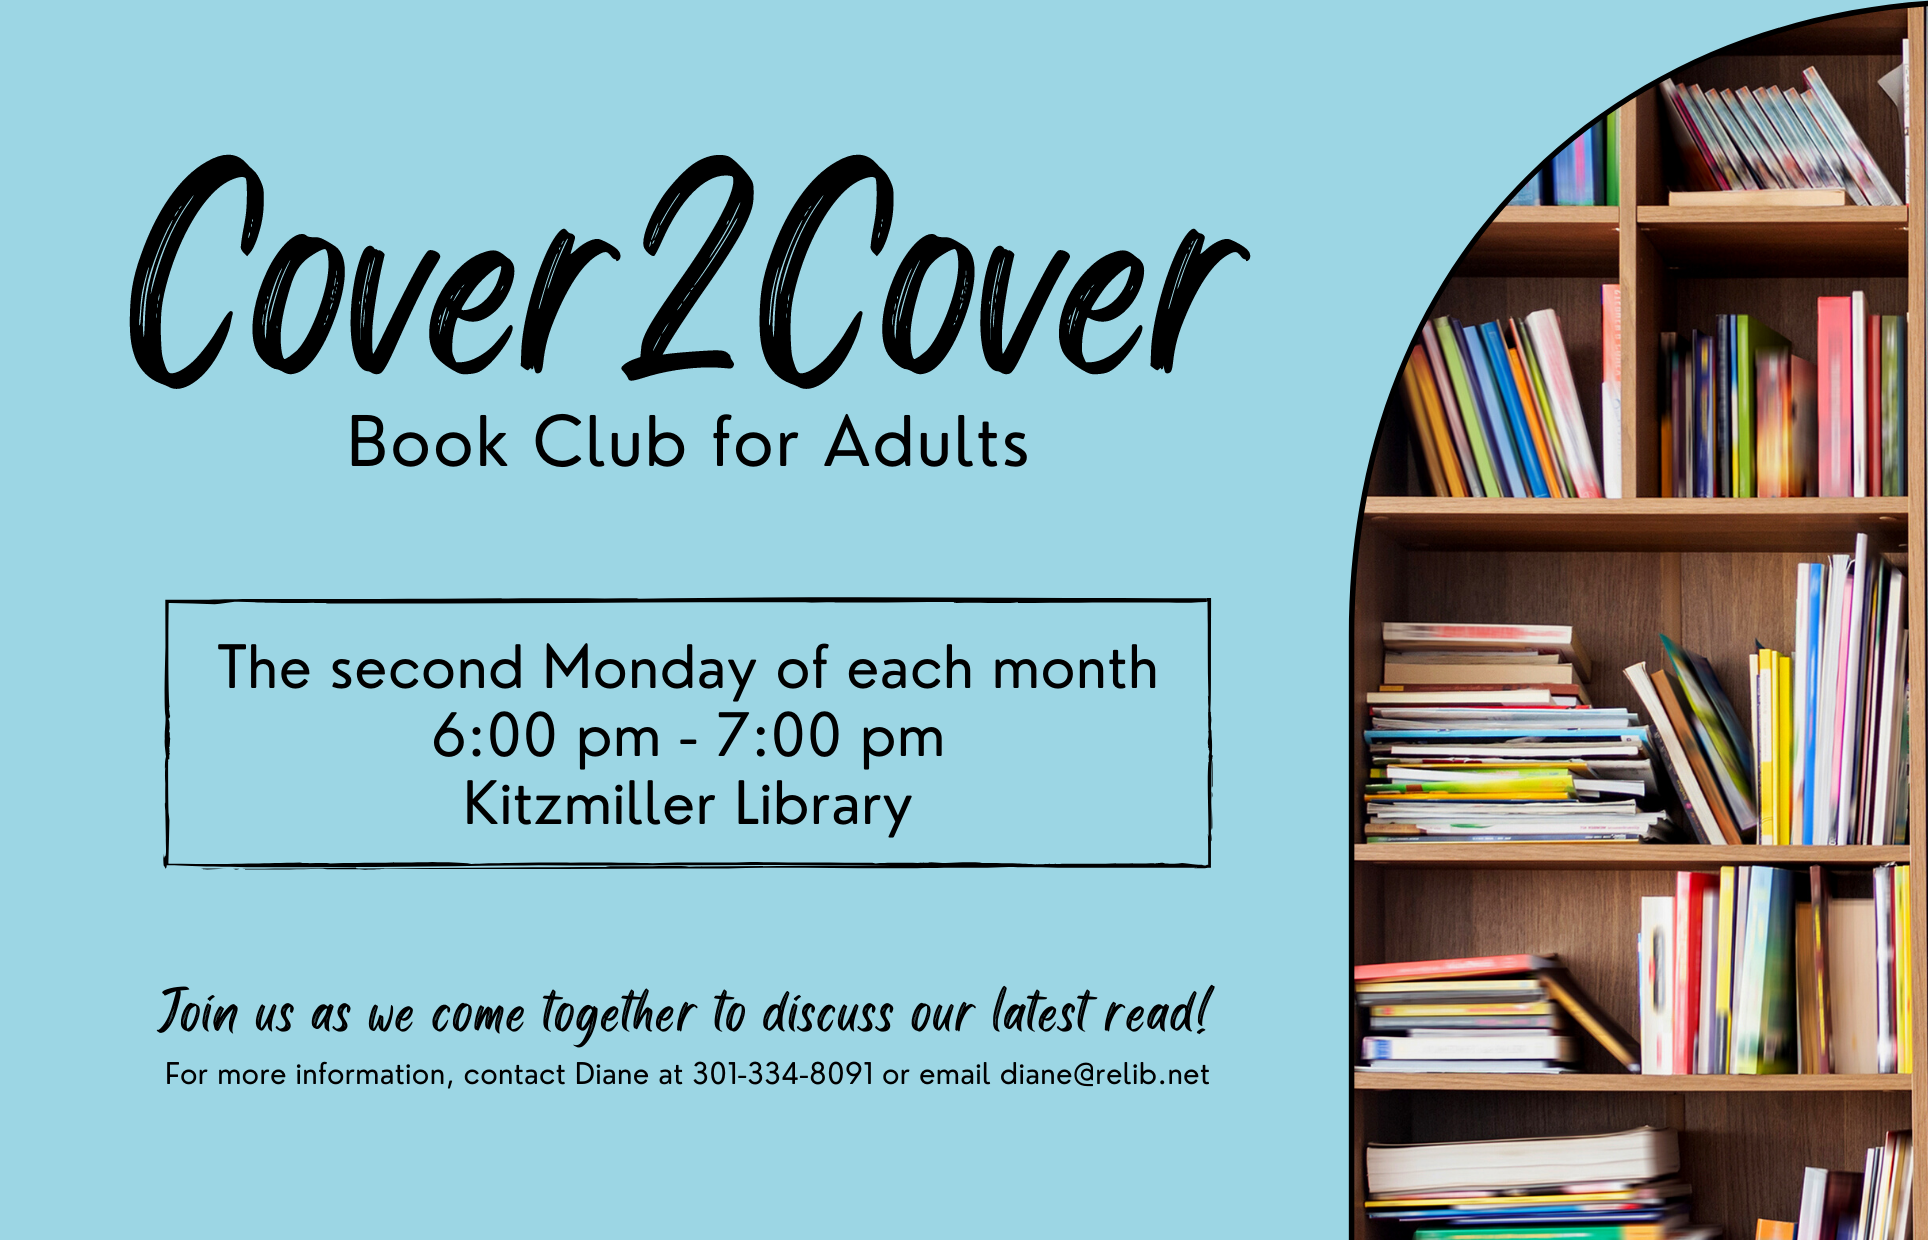 Cover2Cover - Book Club For Adults